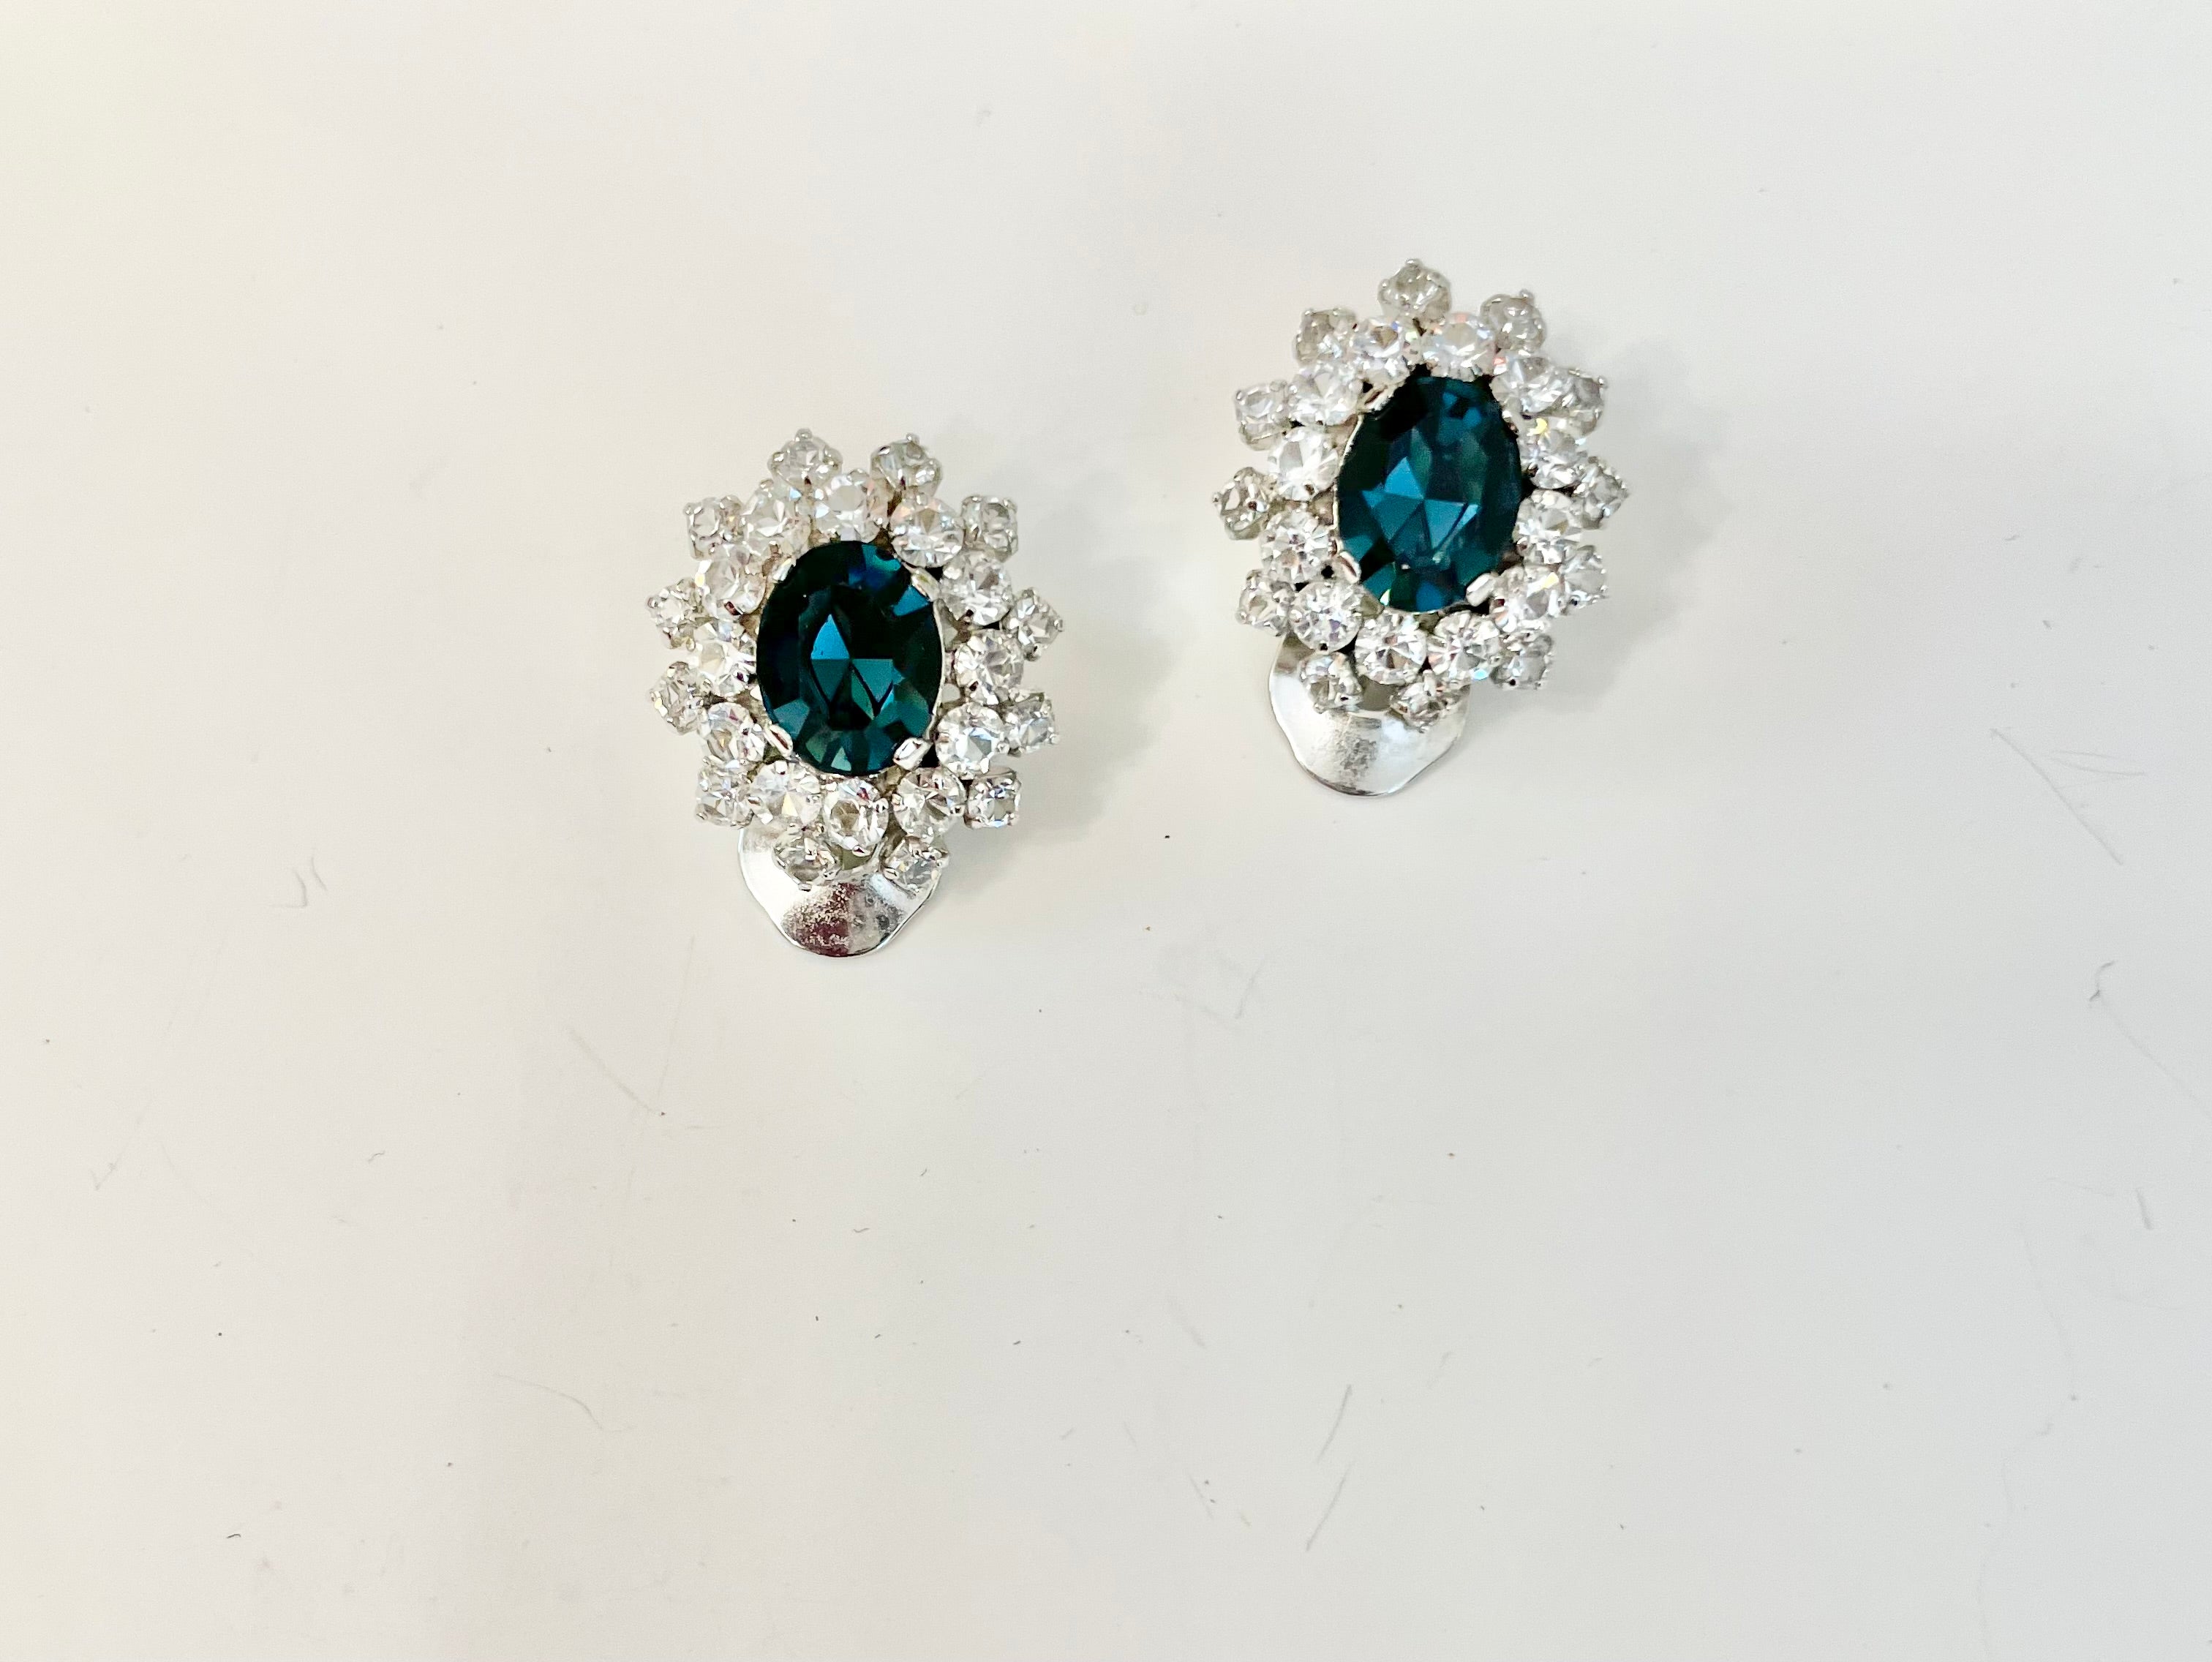 The most stunning sapphire glass button earrings.... so elegant